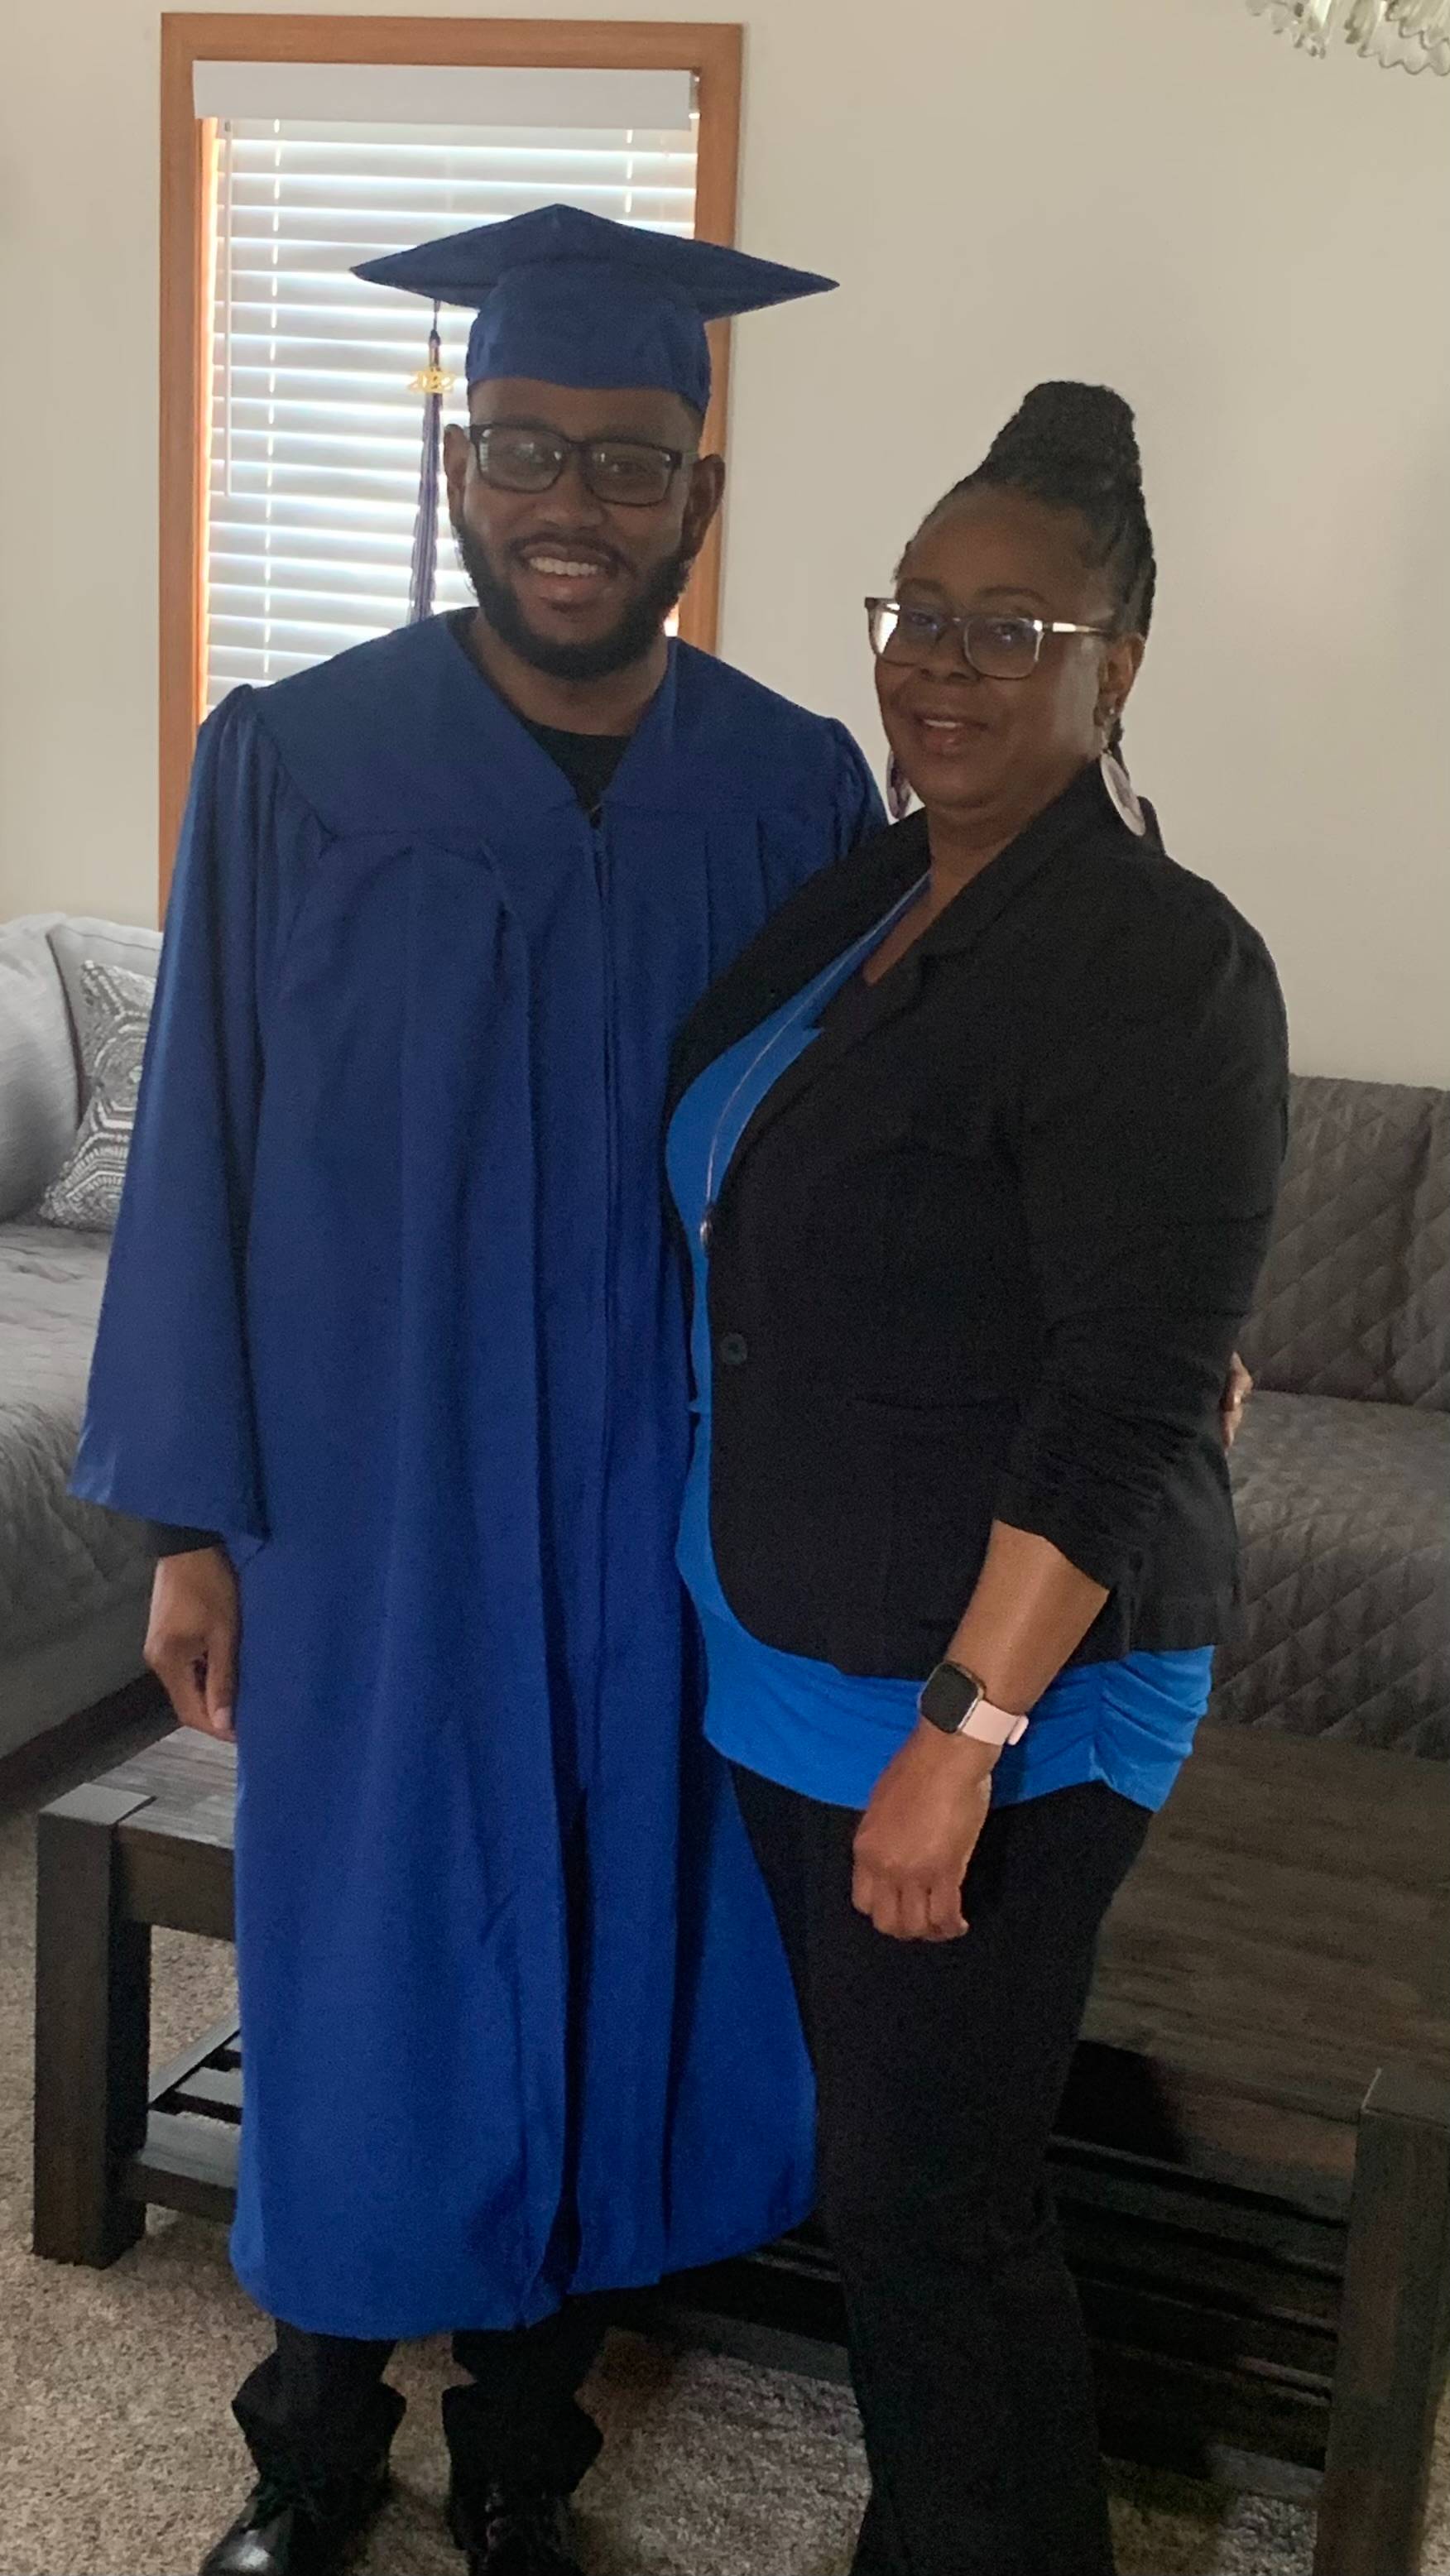 Tina Lee standing and smiling with her son, Daniel, in his cap and gown